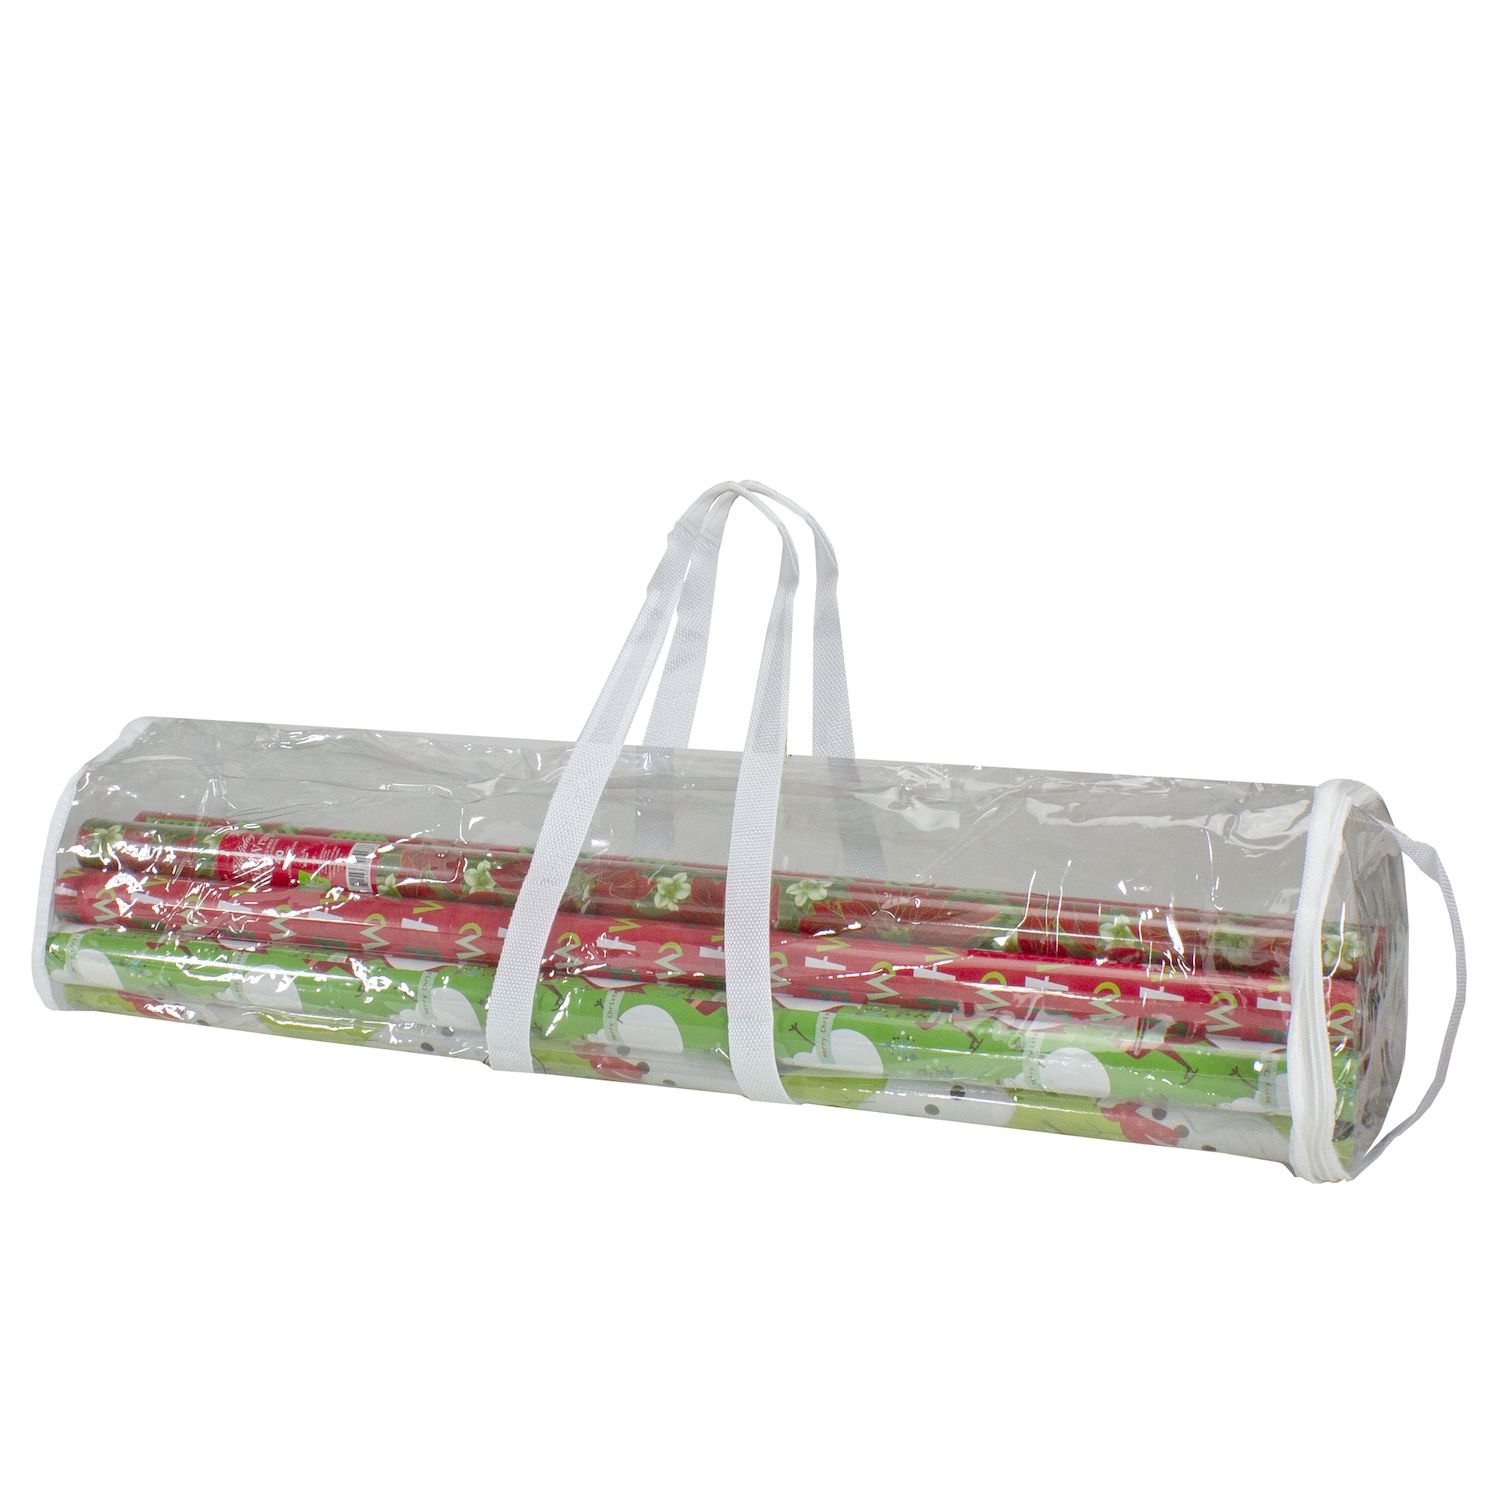 Hastings Home Wrapping Paper Upright Storage Box For 20 Rolls Of 40 Gift  Wrap With Lid, Dividers And Handles - Red With Green Handles : Target